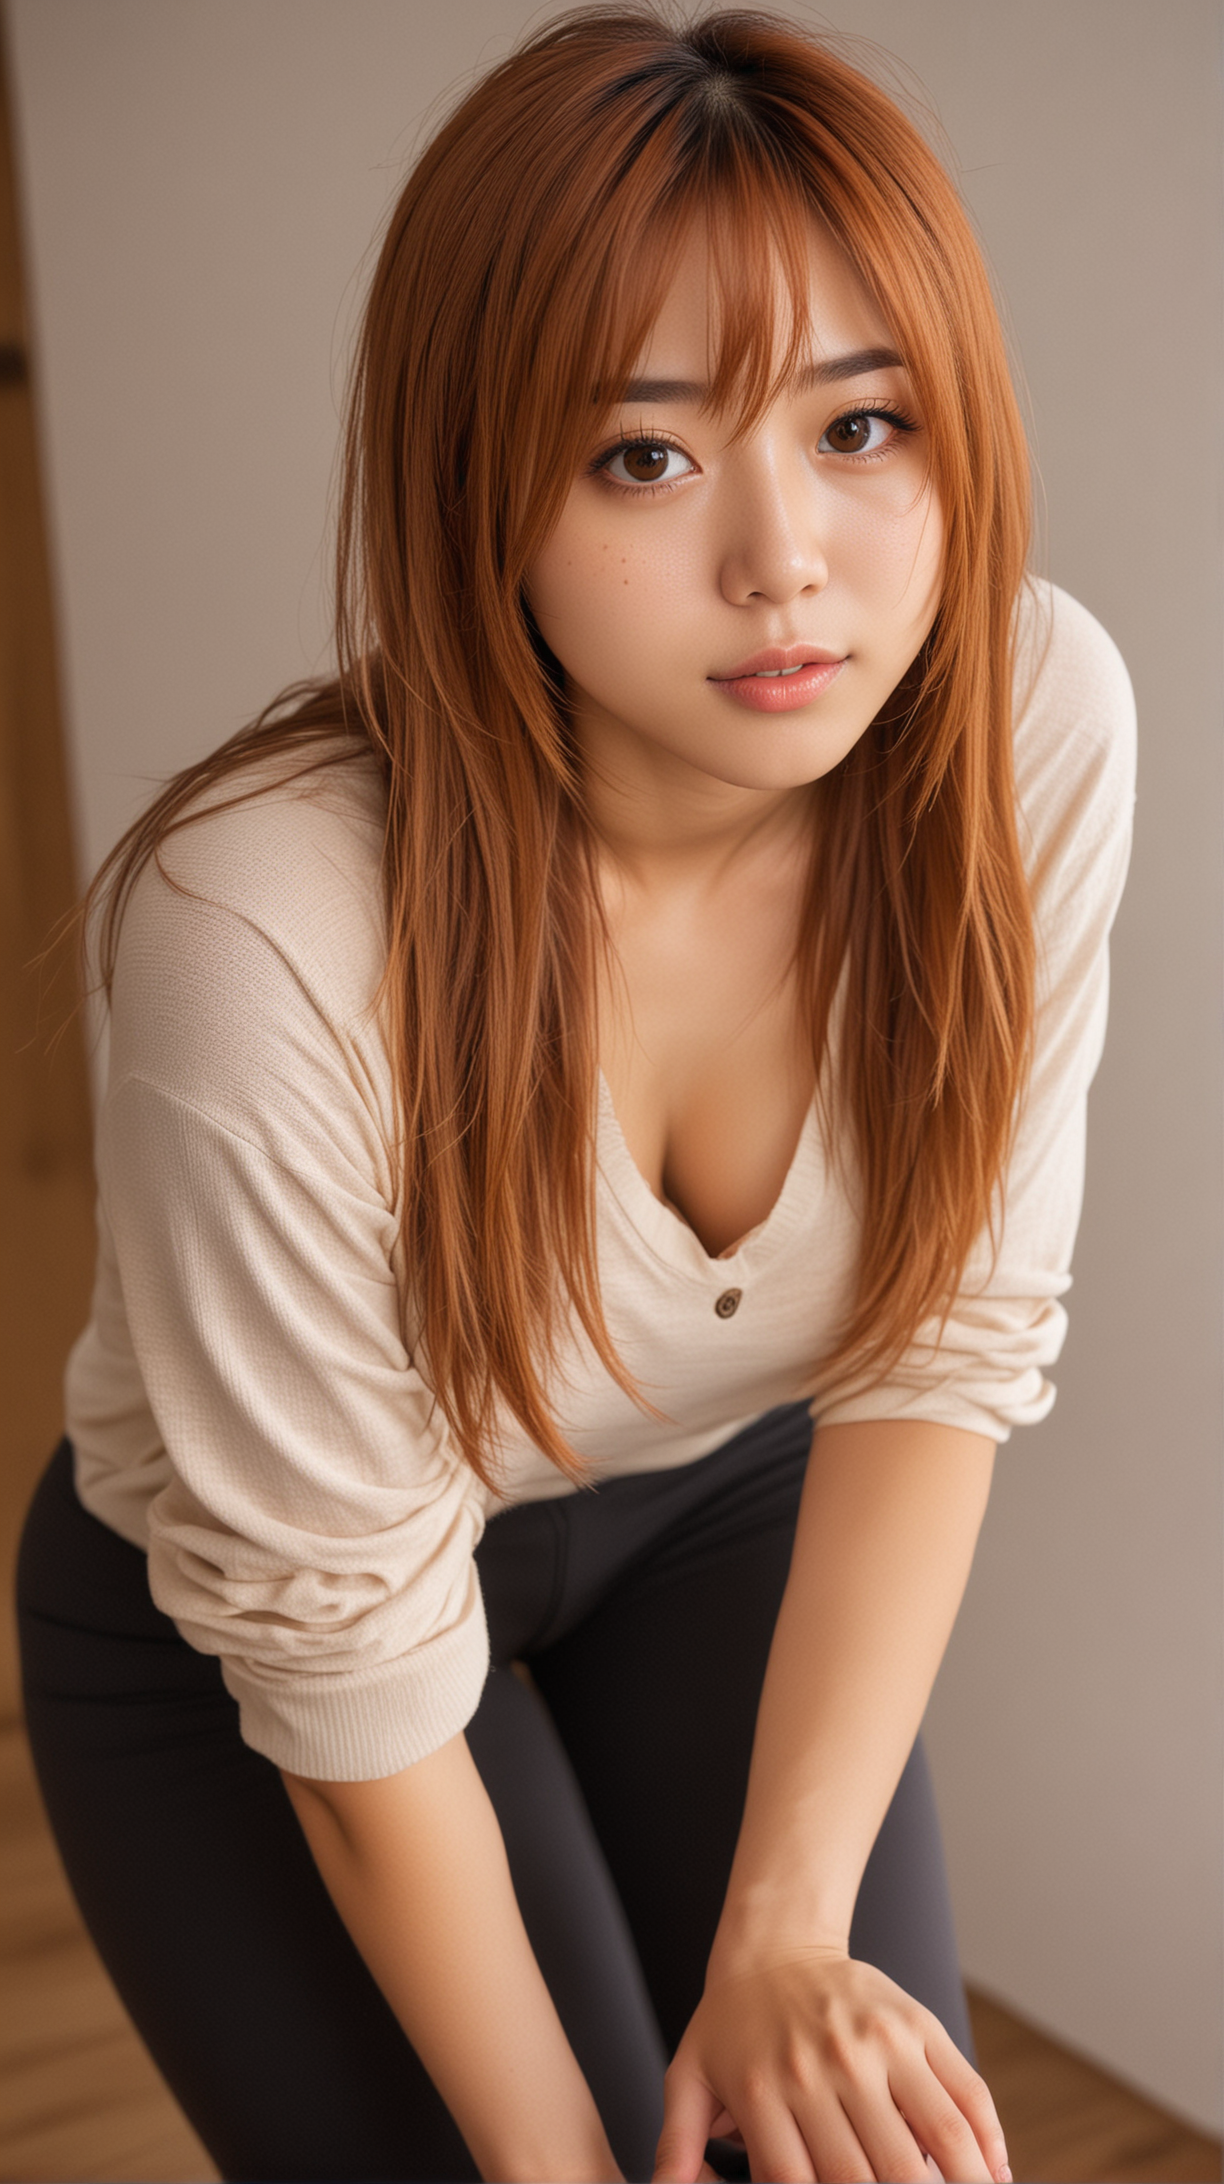 Fullbody Japanese girl with caramel-colored medium length hair, freckles and huge amber eyes. Fullbody posing sexy with leggings